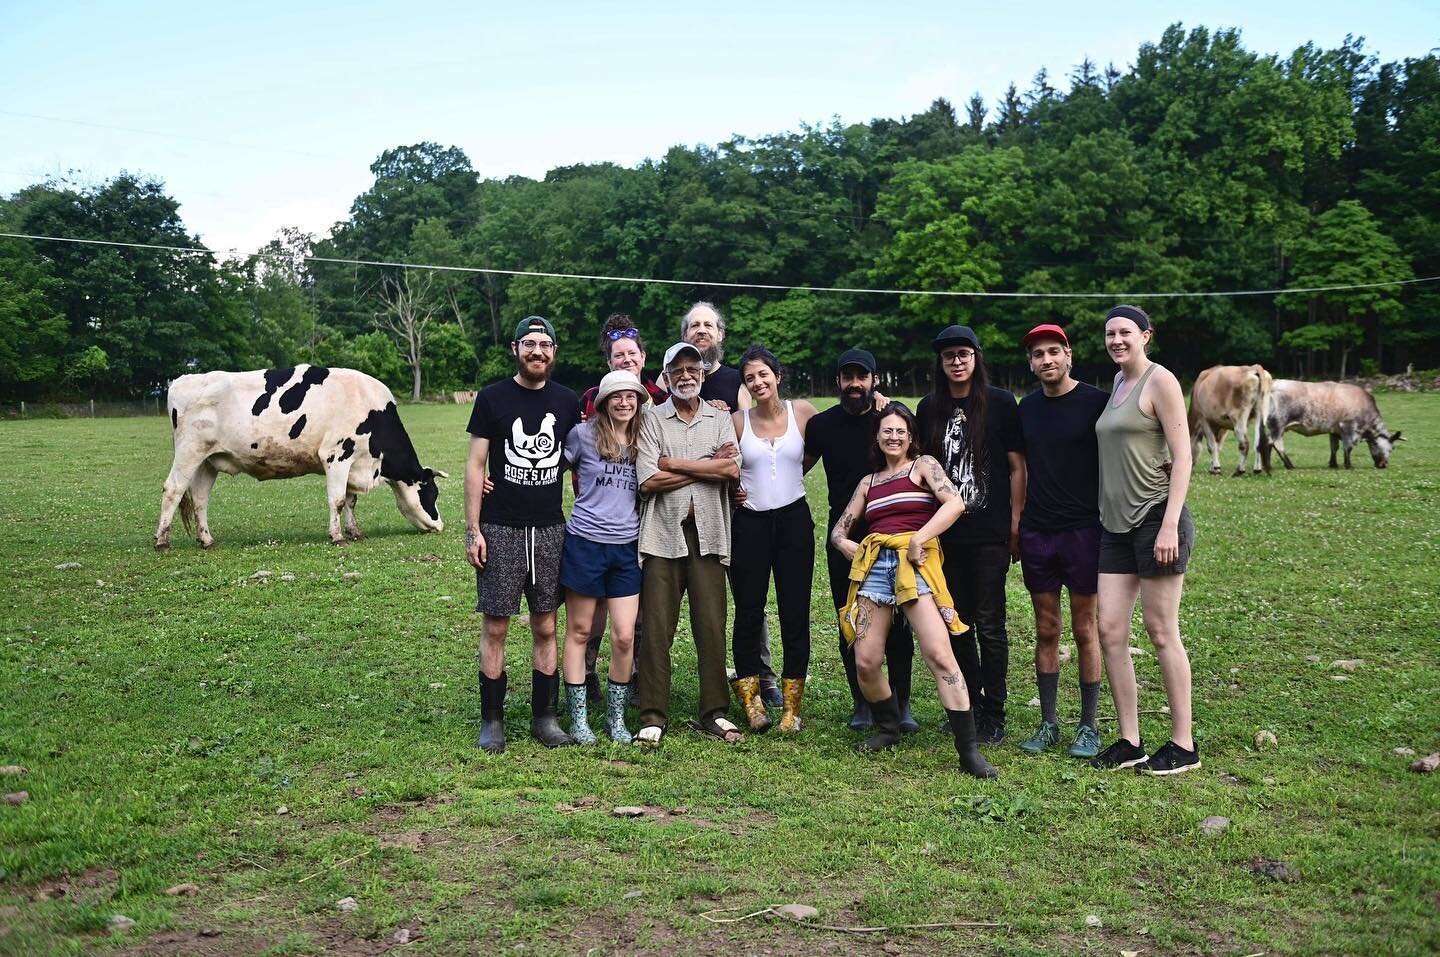 Another successful trip to @lakshmicowanimalsanctuary! A group of us spent the last couple days working on projects around the farm and spending time with the beautiful cows. Lakshmi is really a home away from home. We can&rsquo;t wait until next yea